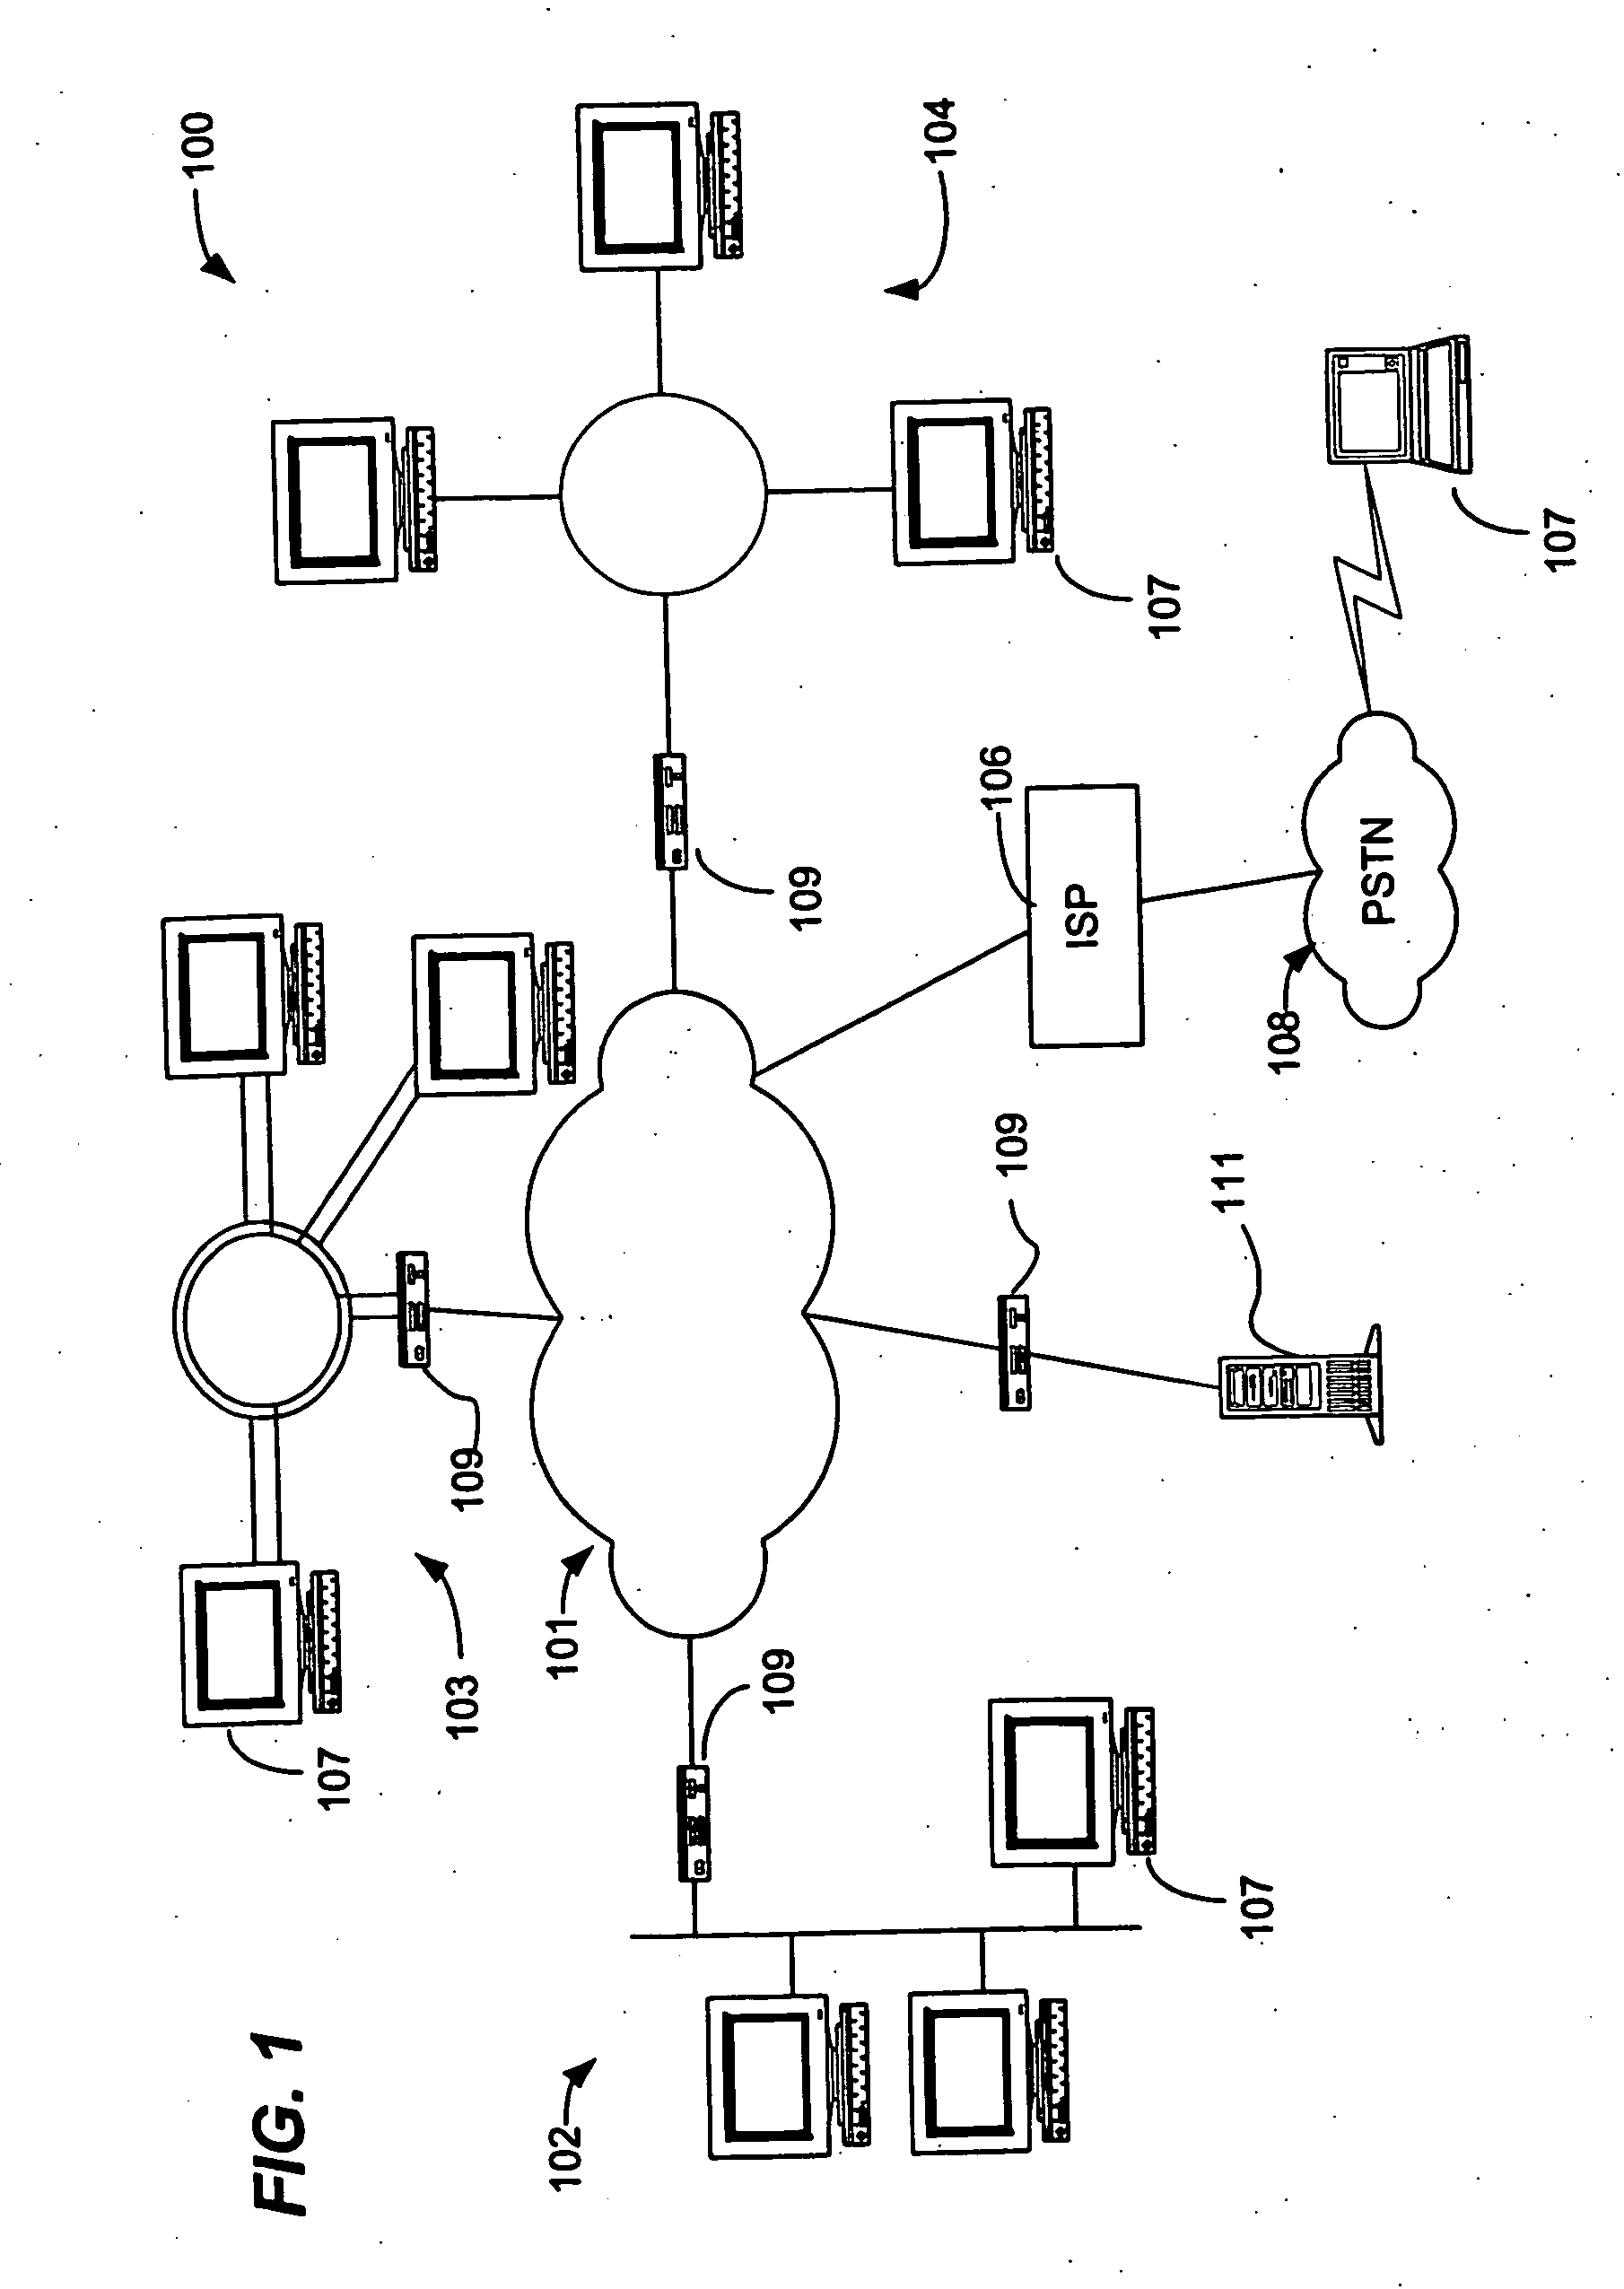 System and method for implementing application functionality within a network infrastructure